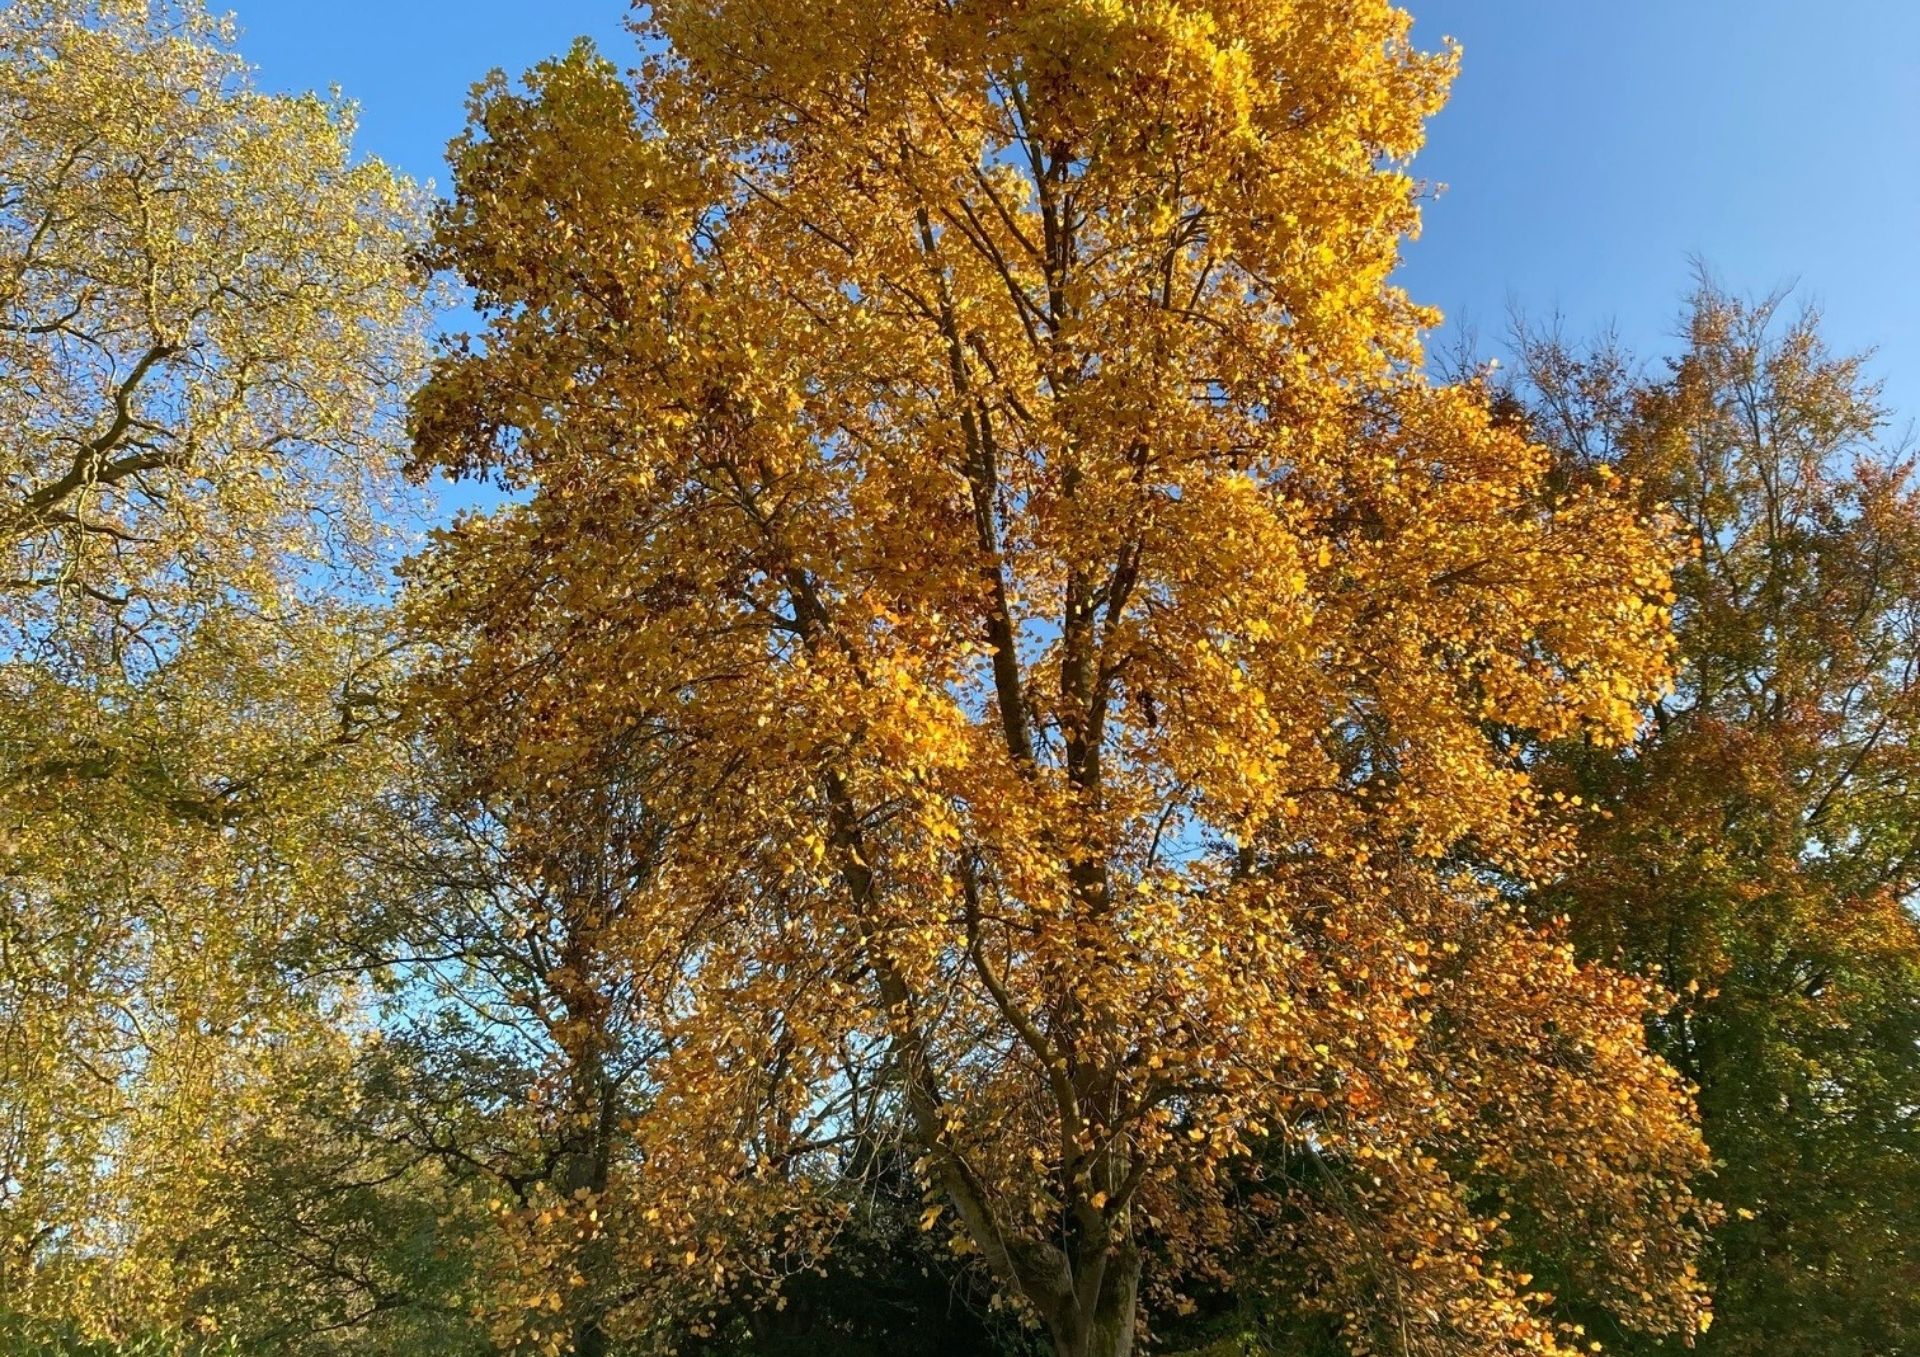 A photograph of a Tulip Tree in Sydney Gardens taken in autumn